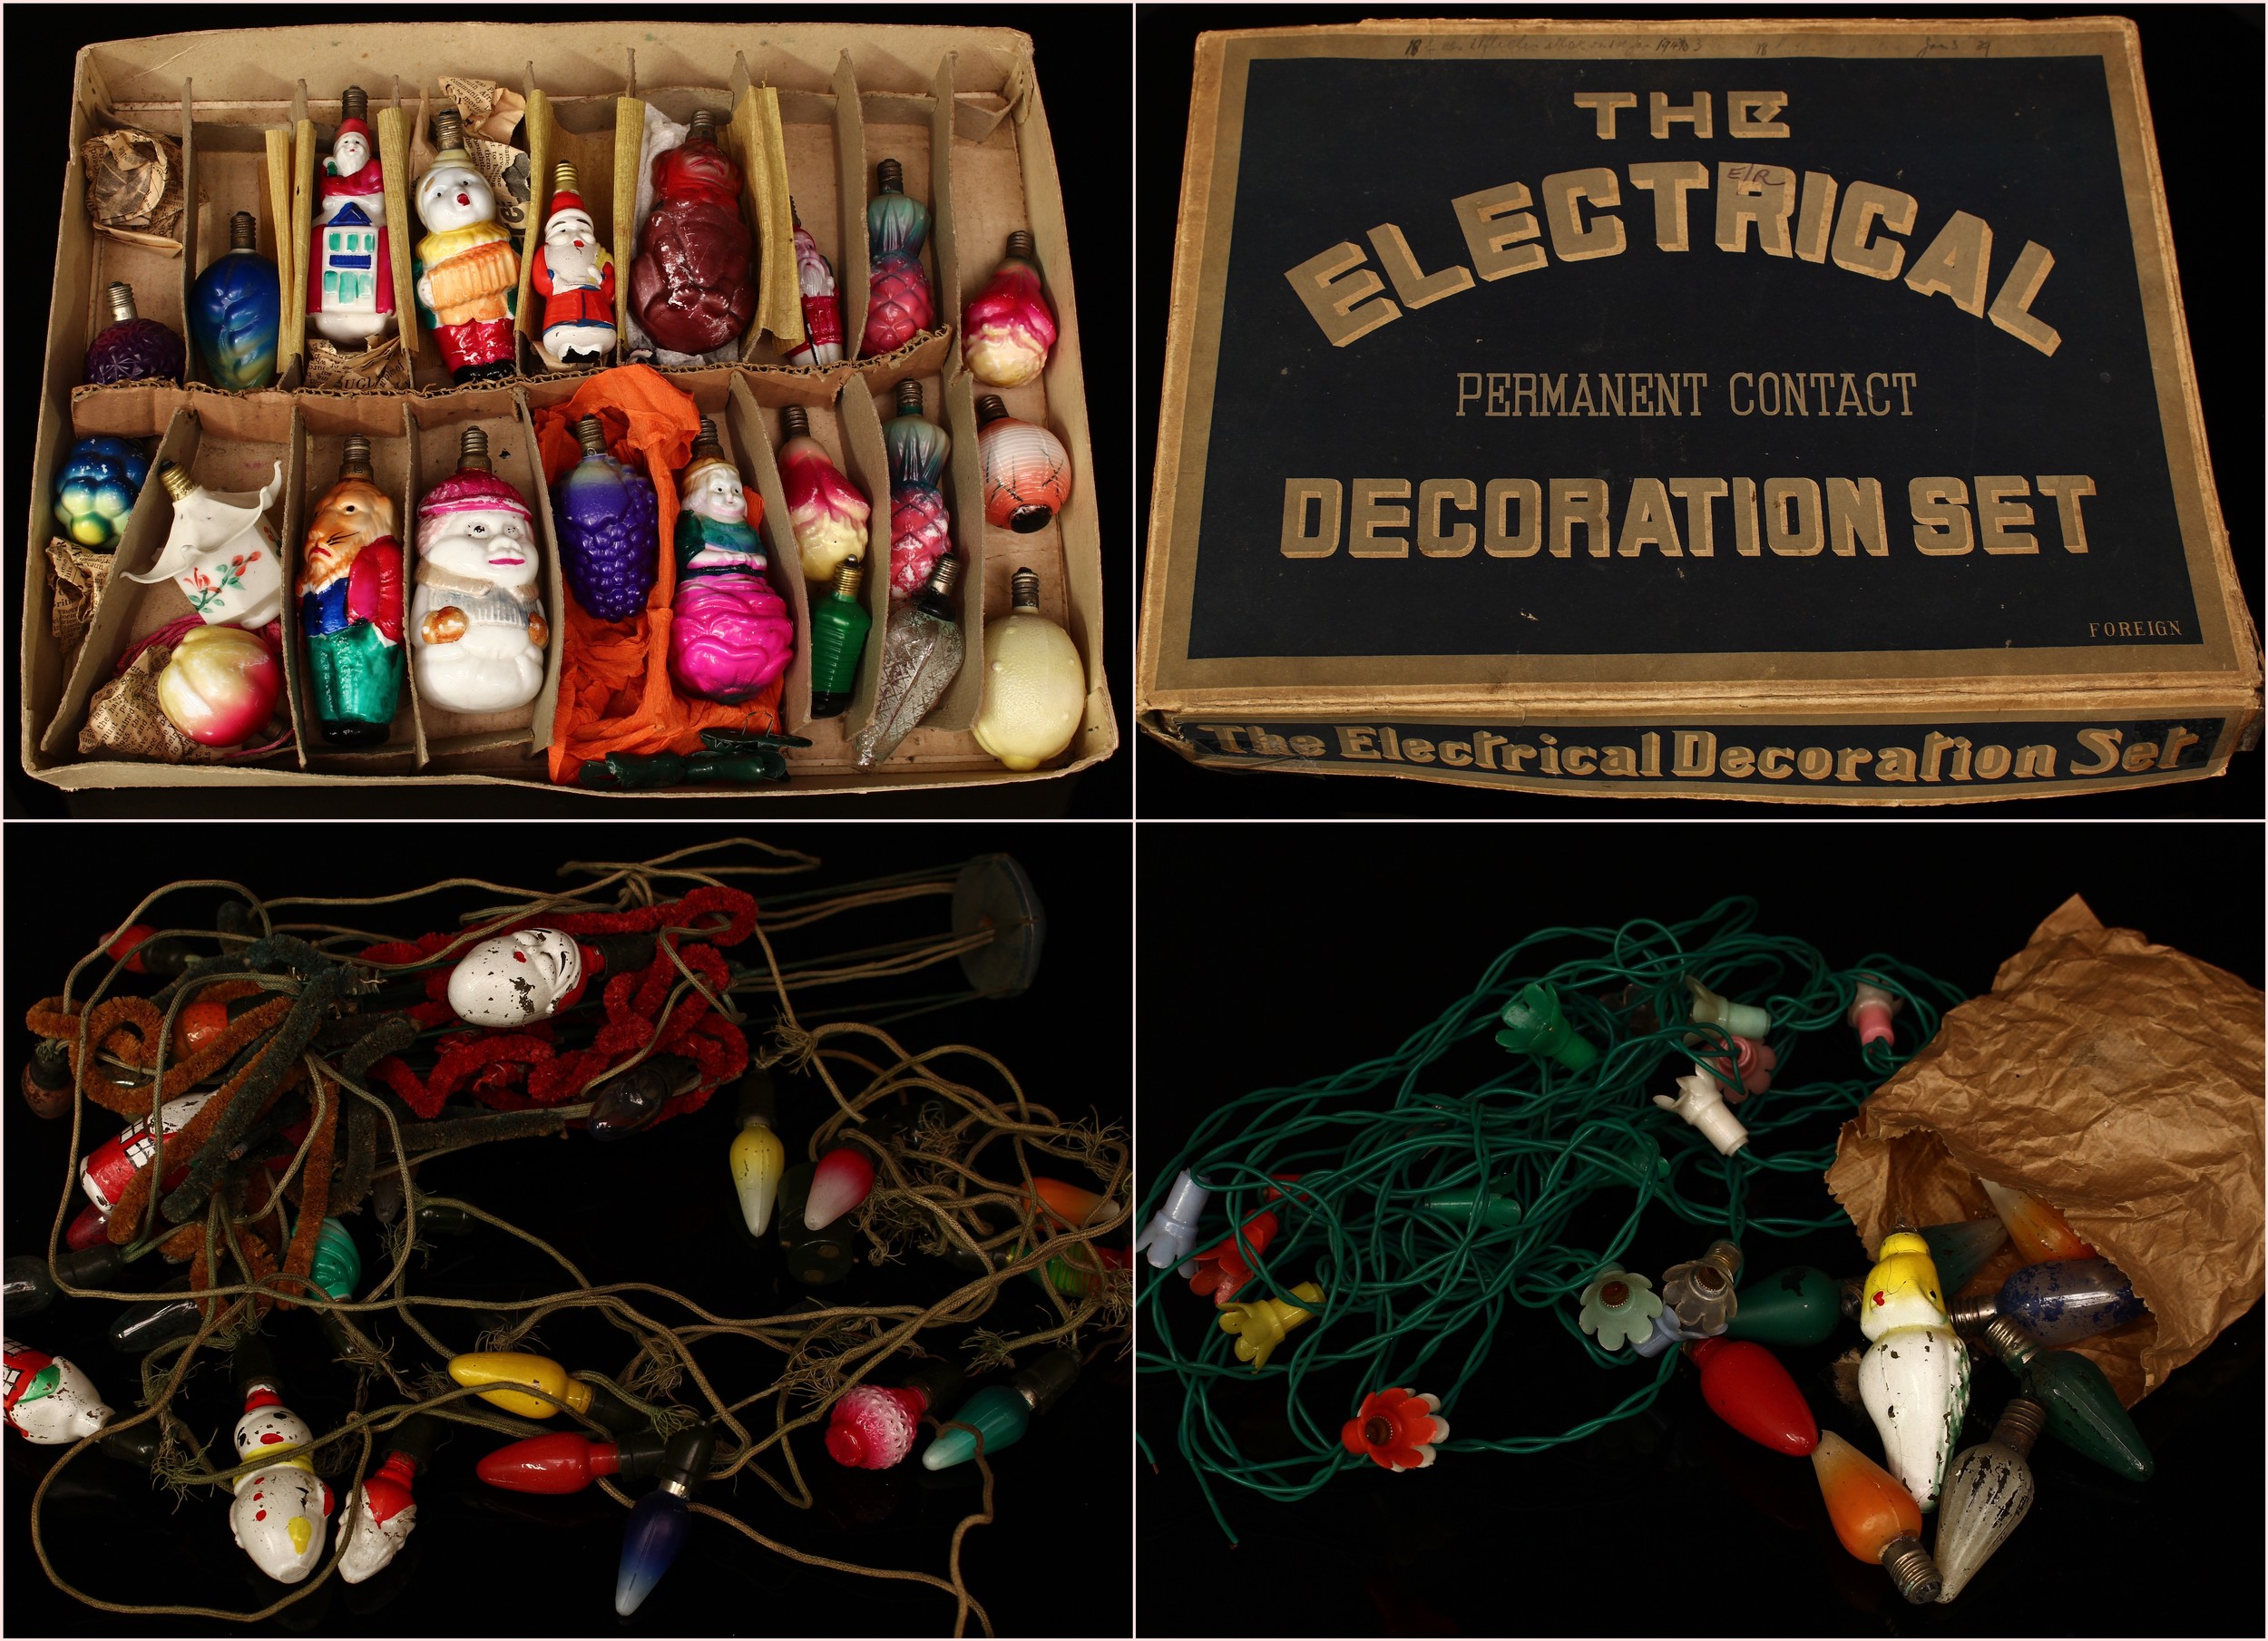 A set of 1940's novelty decorative Christmas light bulbs, The Electrical Permanent Contact